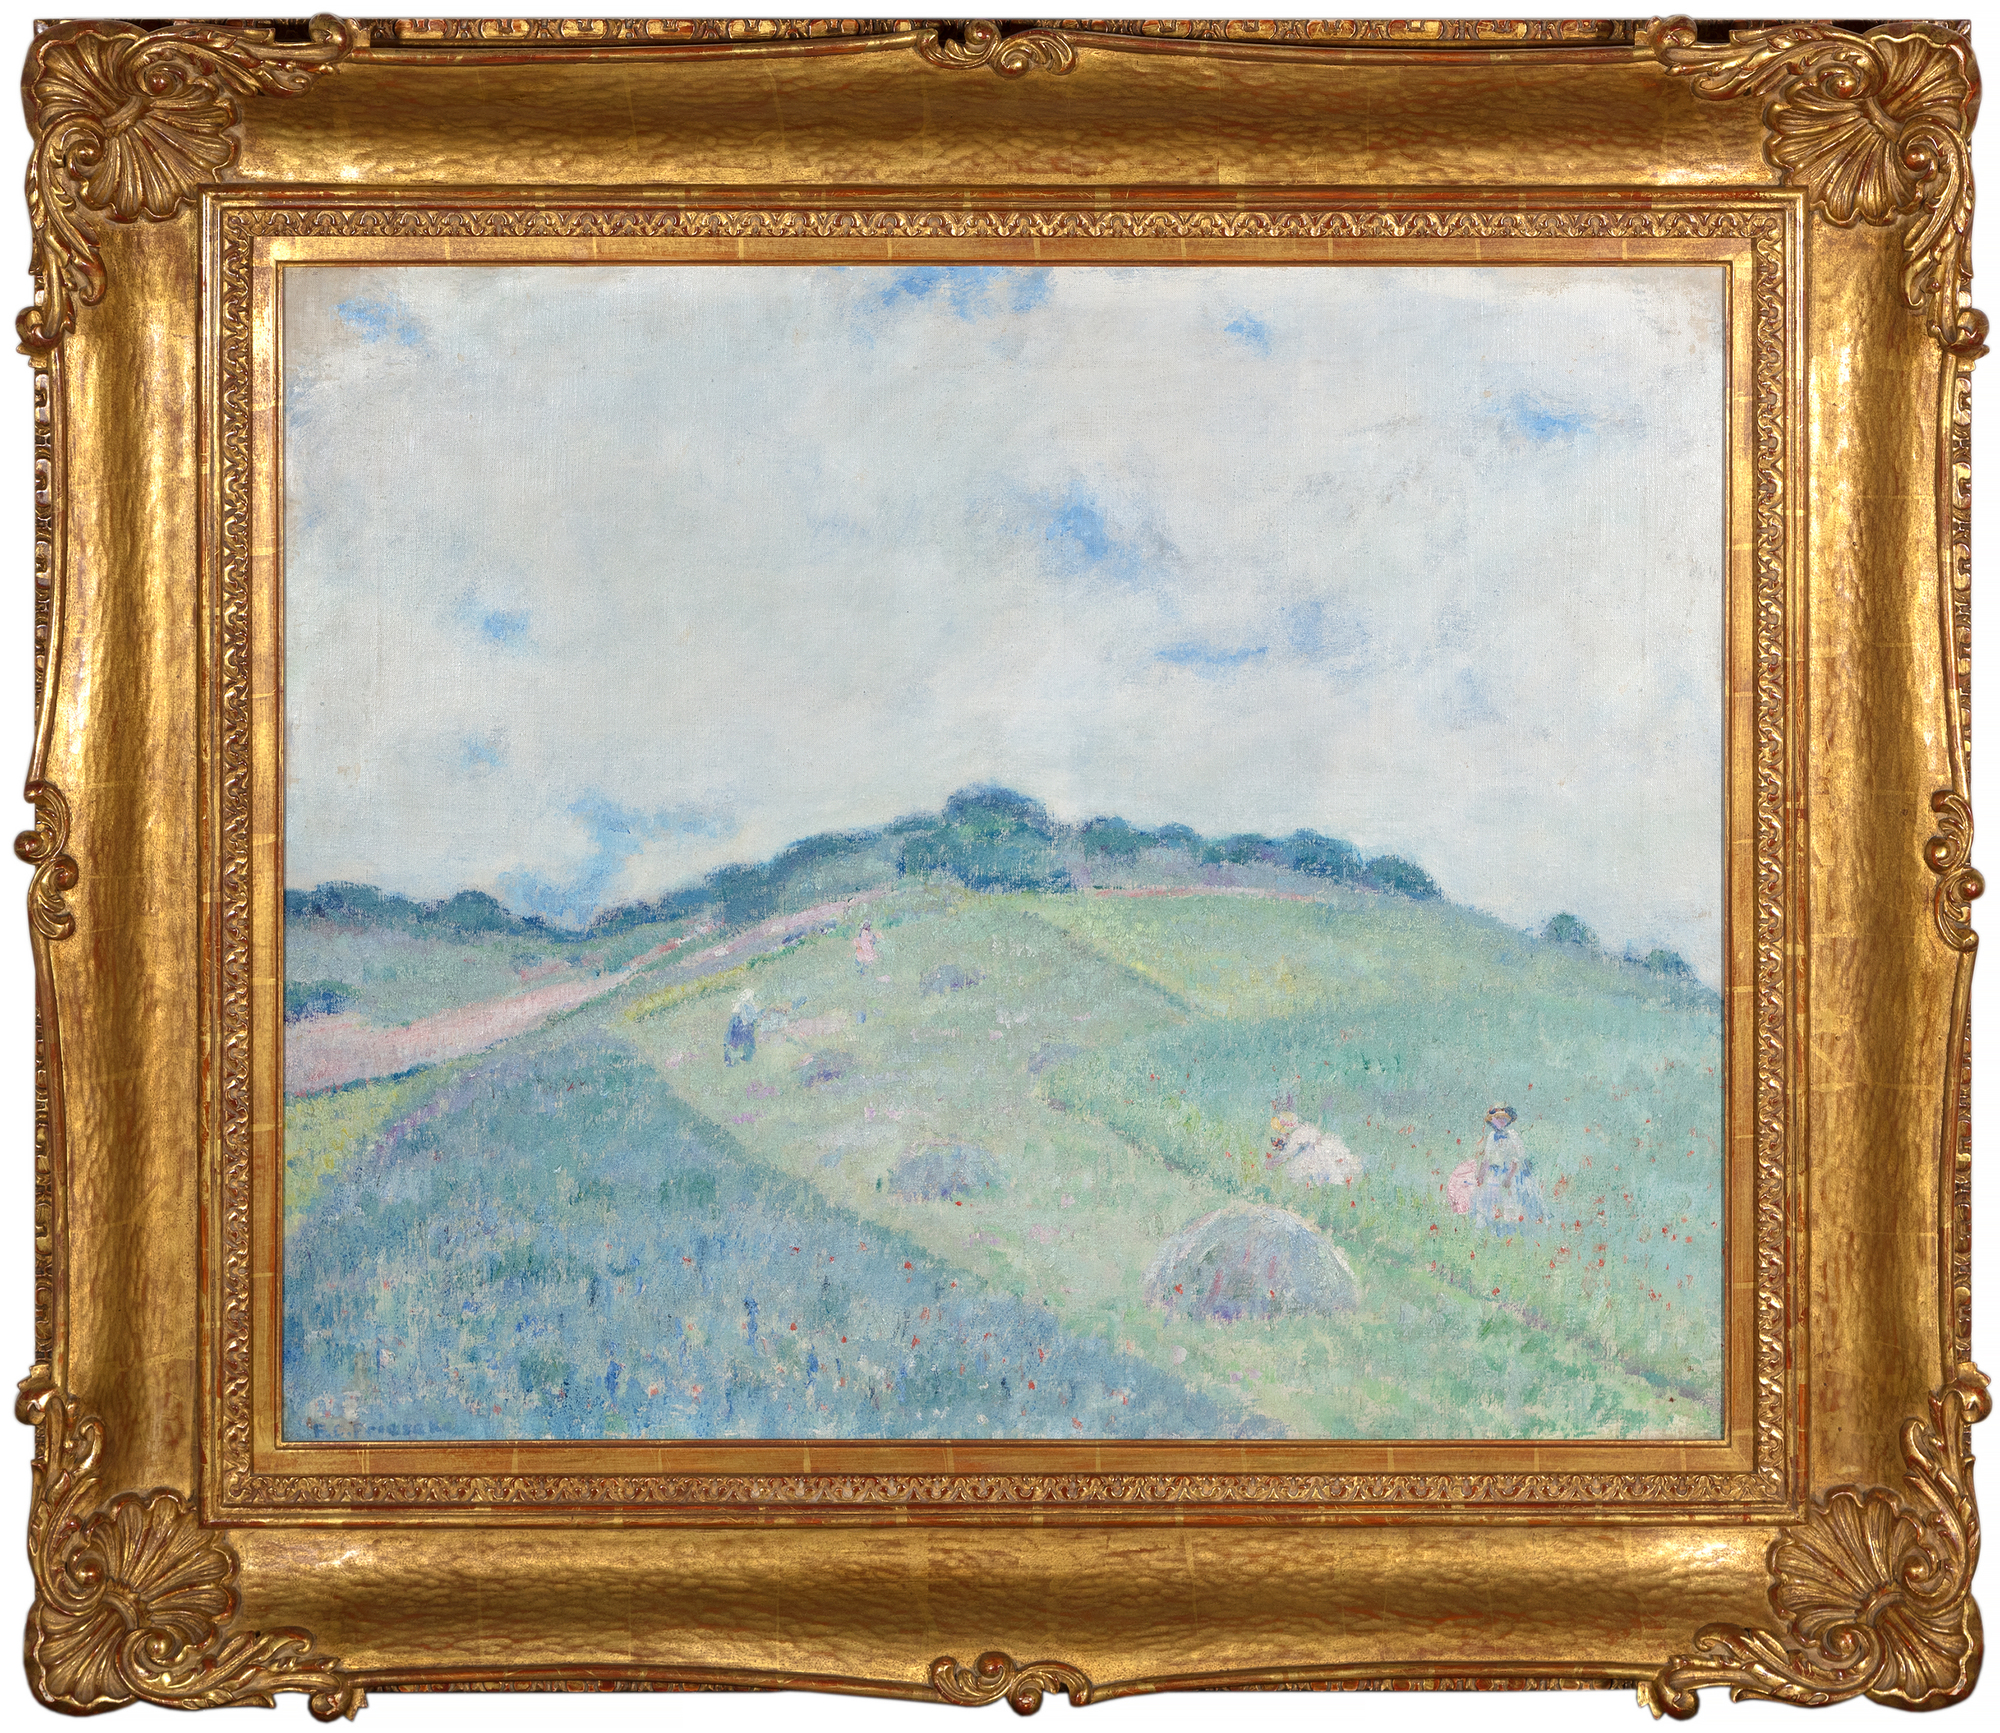 FREDERICK CARL FRIESEKE - Hill at Giverny - oil on canvas - 25 1/4 x 31 1/4 in.